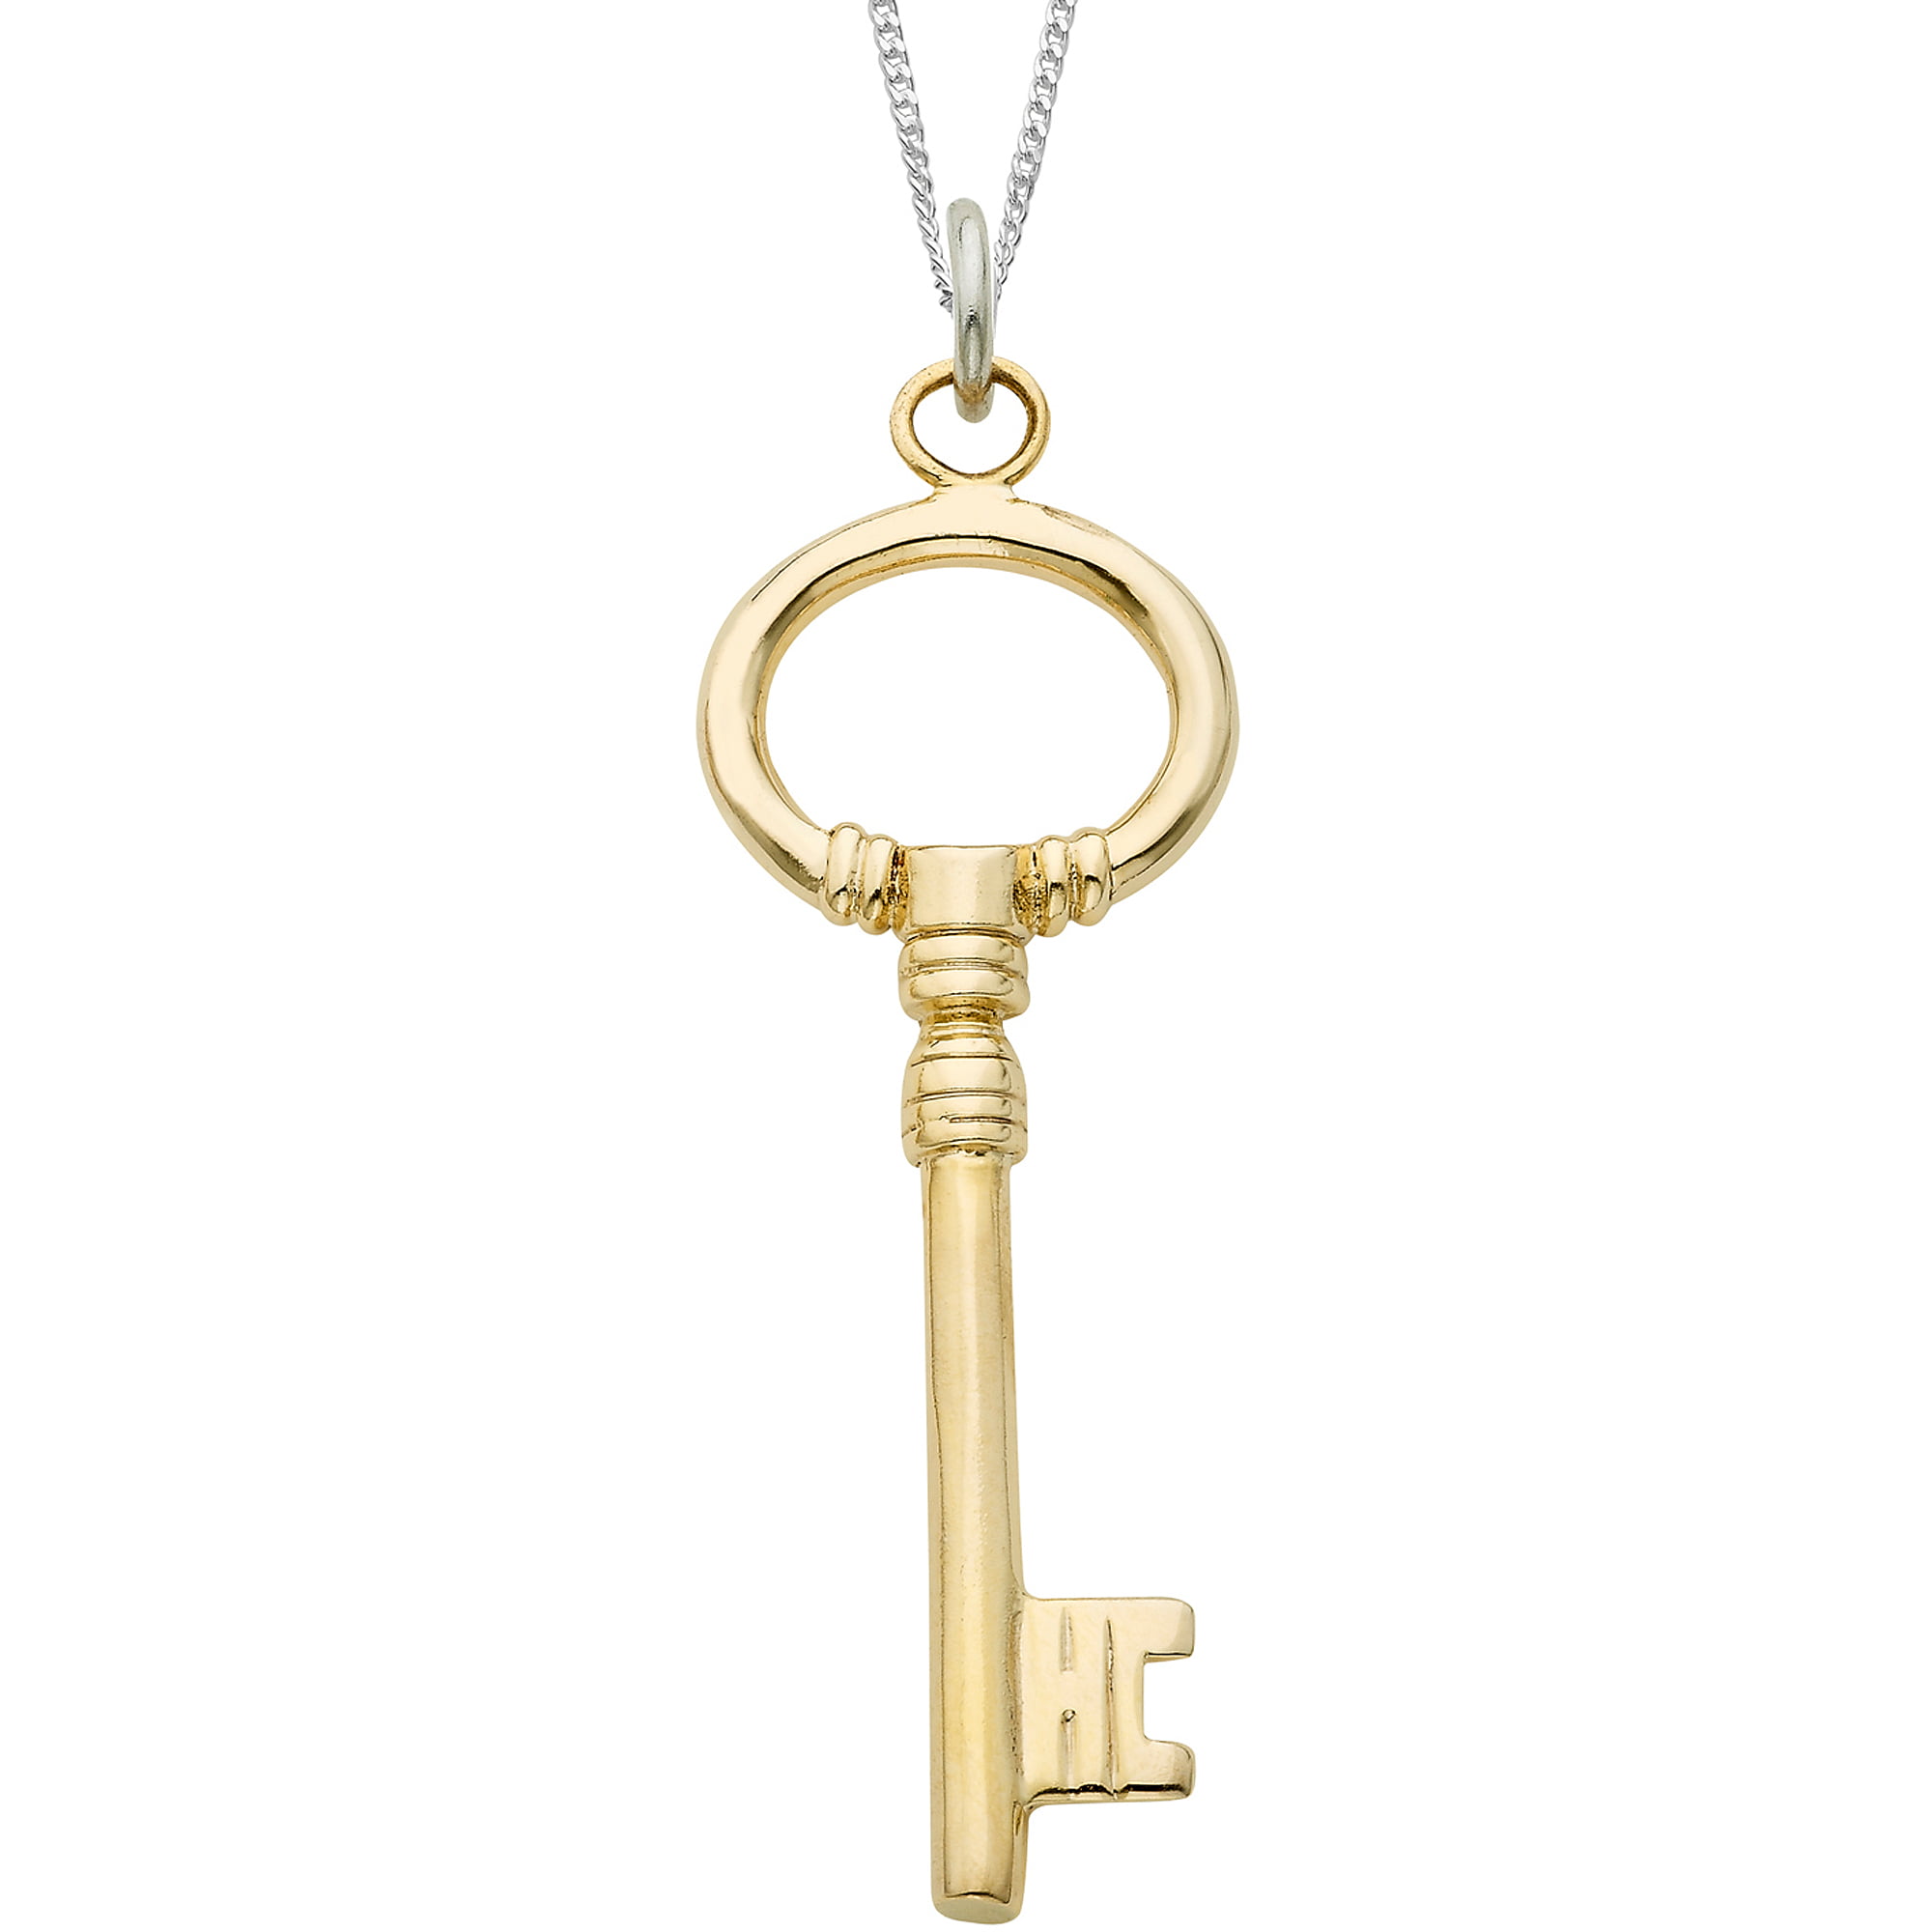 Gold Stainless Steel Key Necklace - Walmart.com